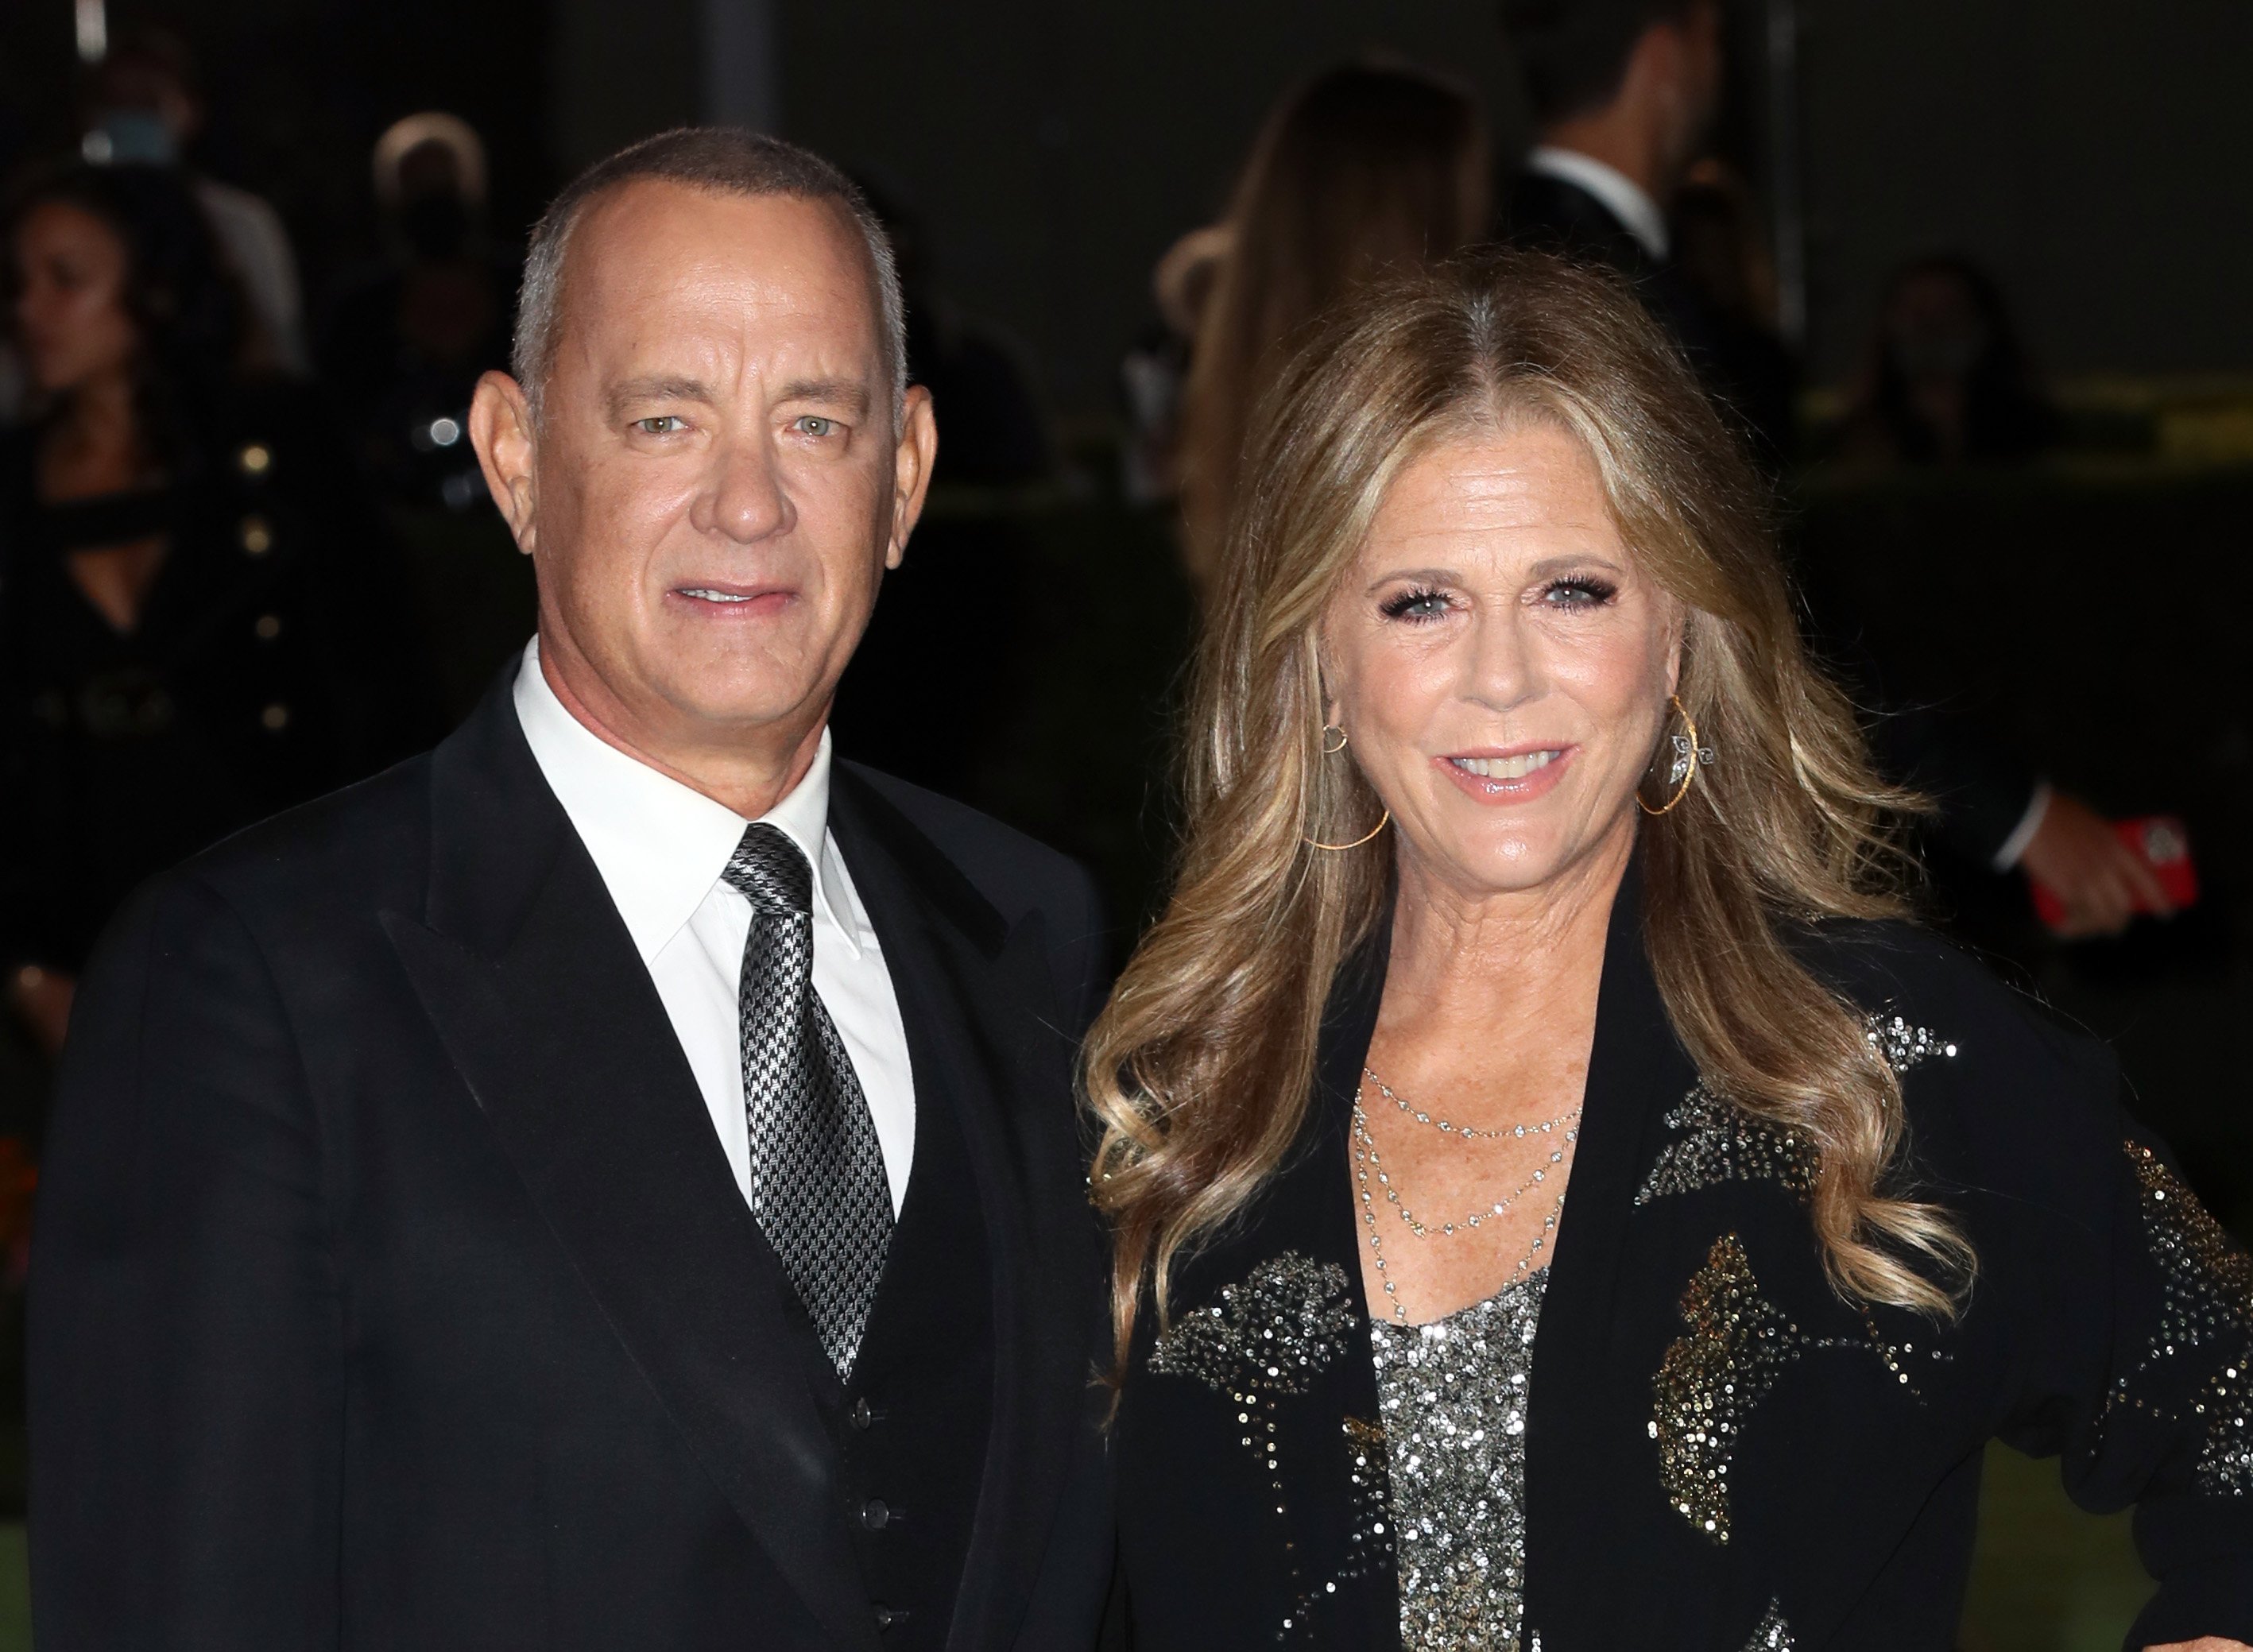 Tom Hanks and Rita Wilson attend The Academy Museum of Motion Pictures Opening Gala at Academy Museum of Motion Pictures on September 25, 2021. | Source: Getty Images